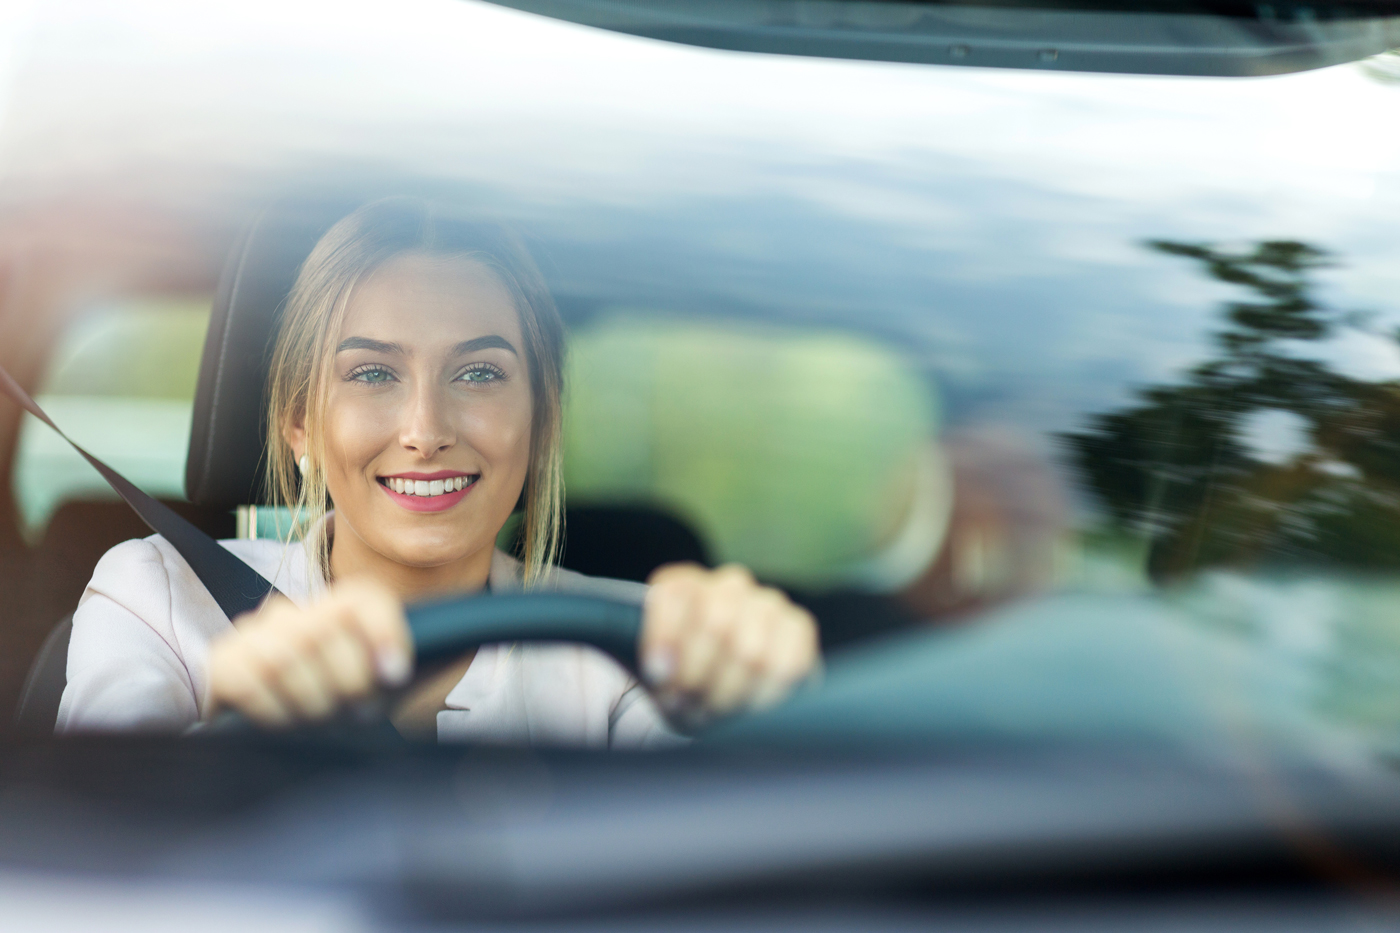 A young woman smiling as she drives her car